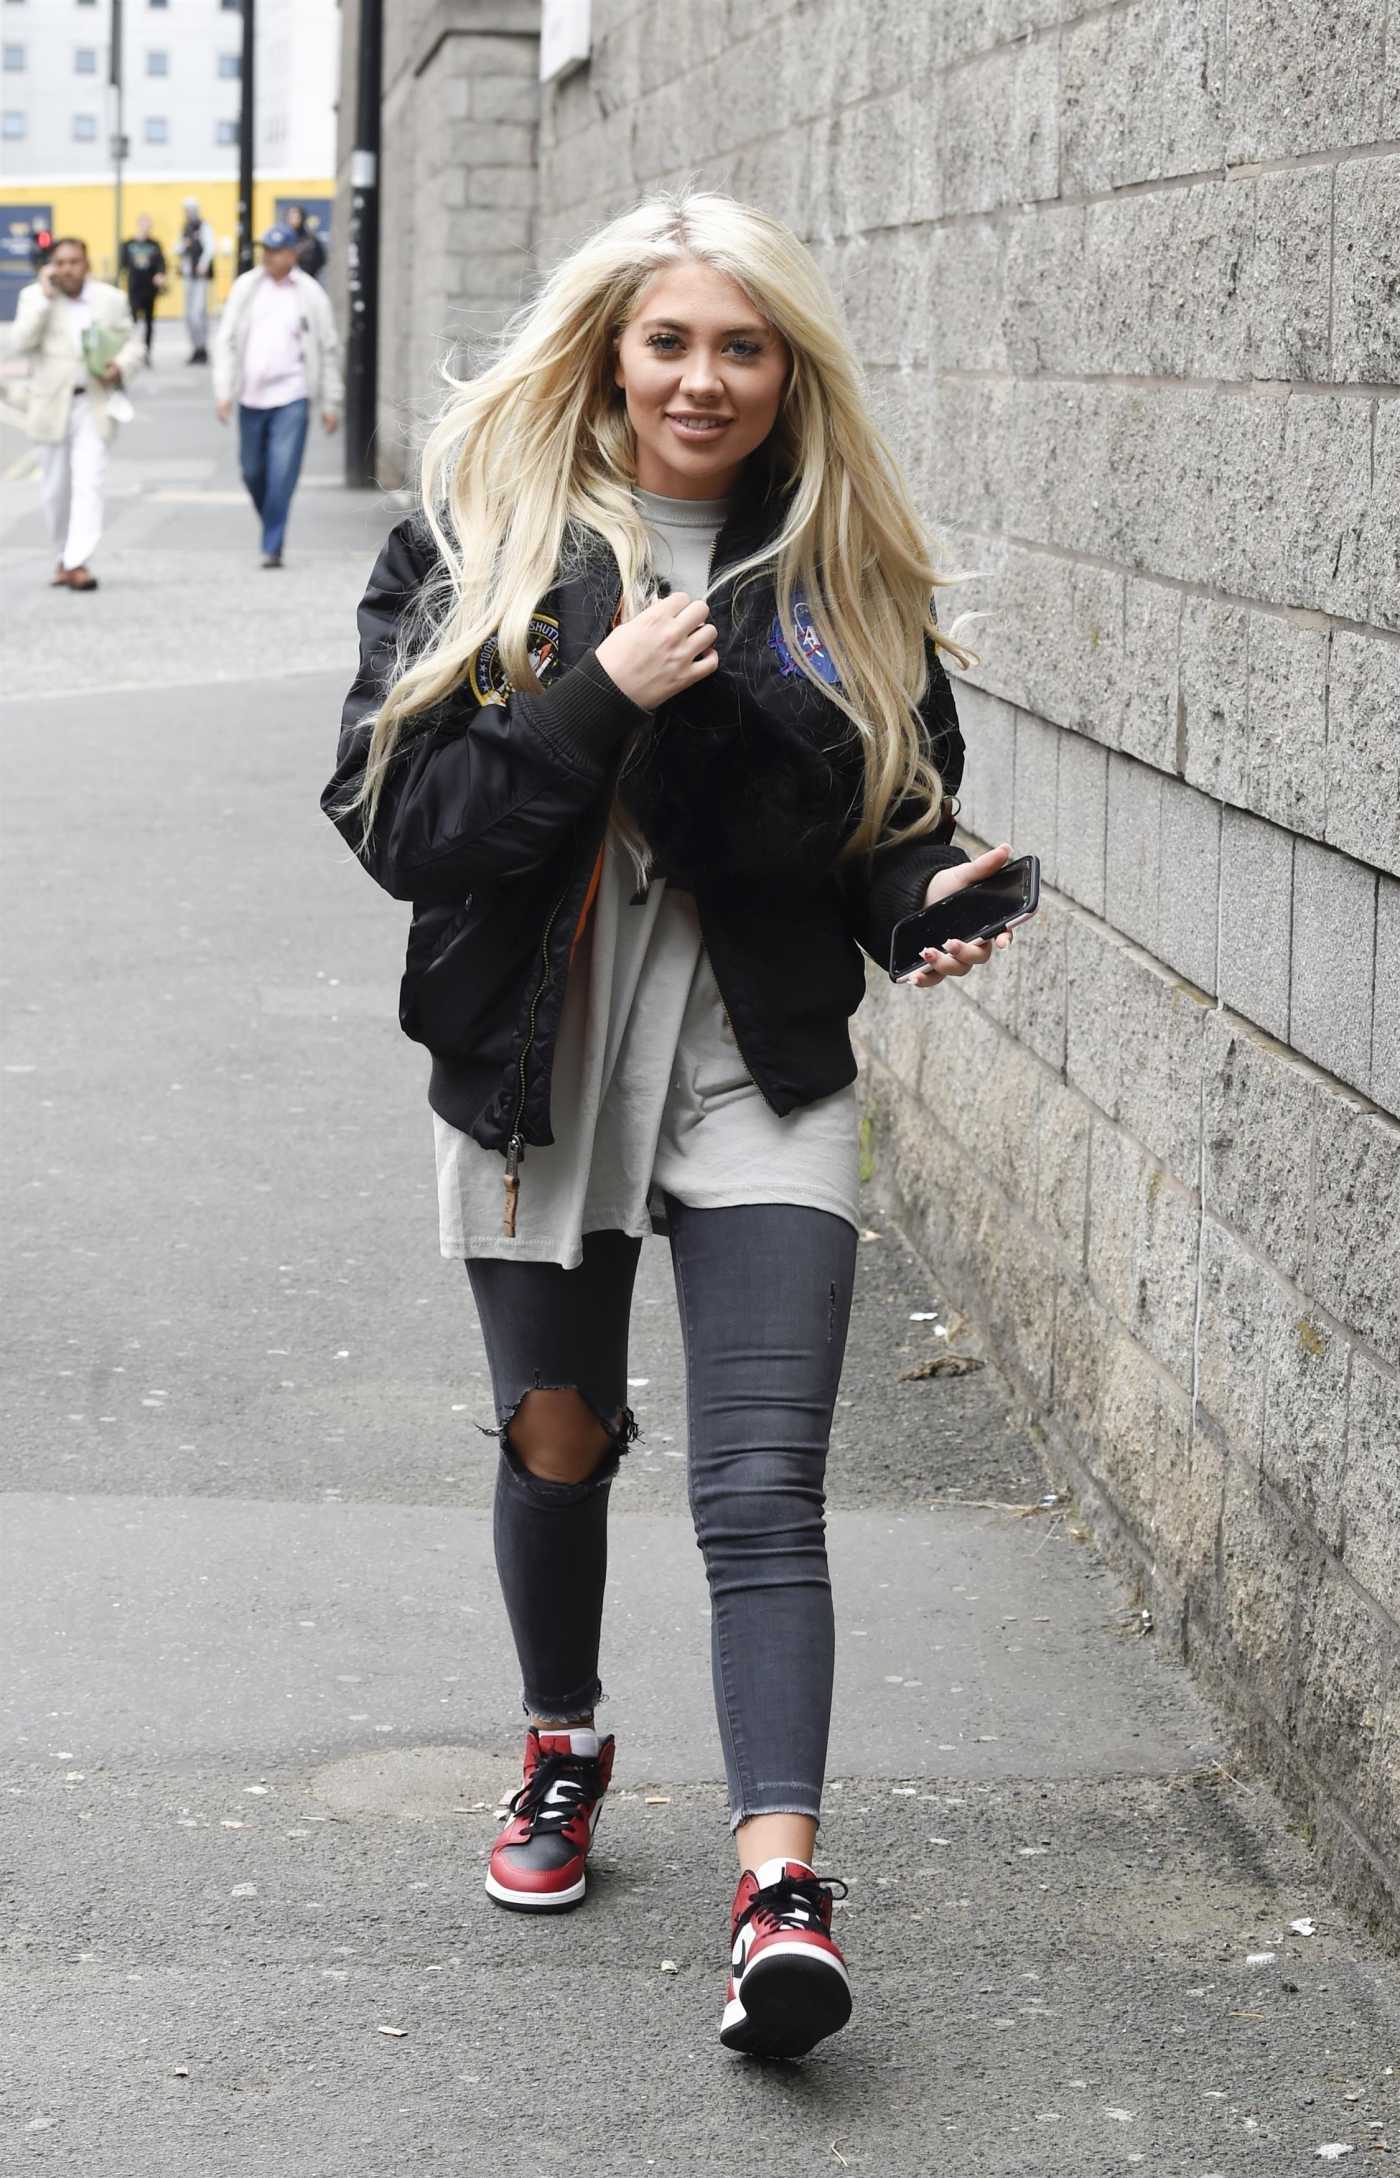 Paige Turley in a Black Jacket Leaves the Manchester Arena in Manchester 07/14/2020